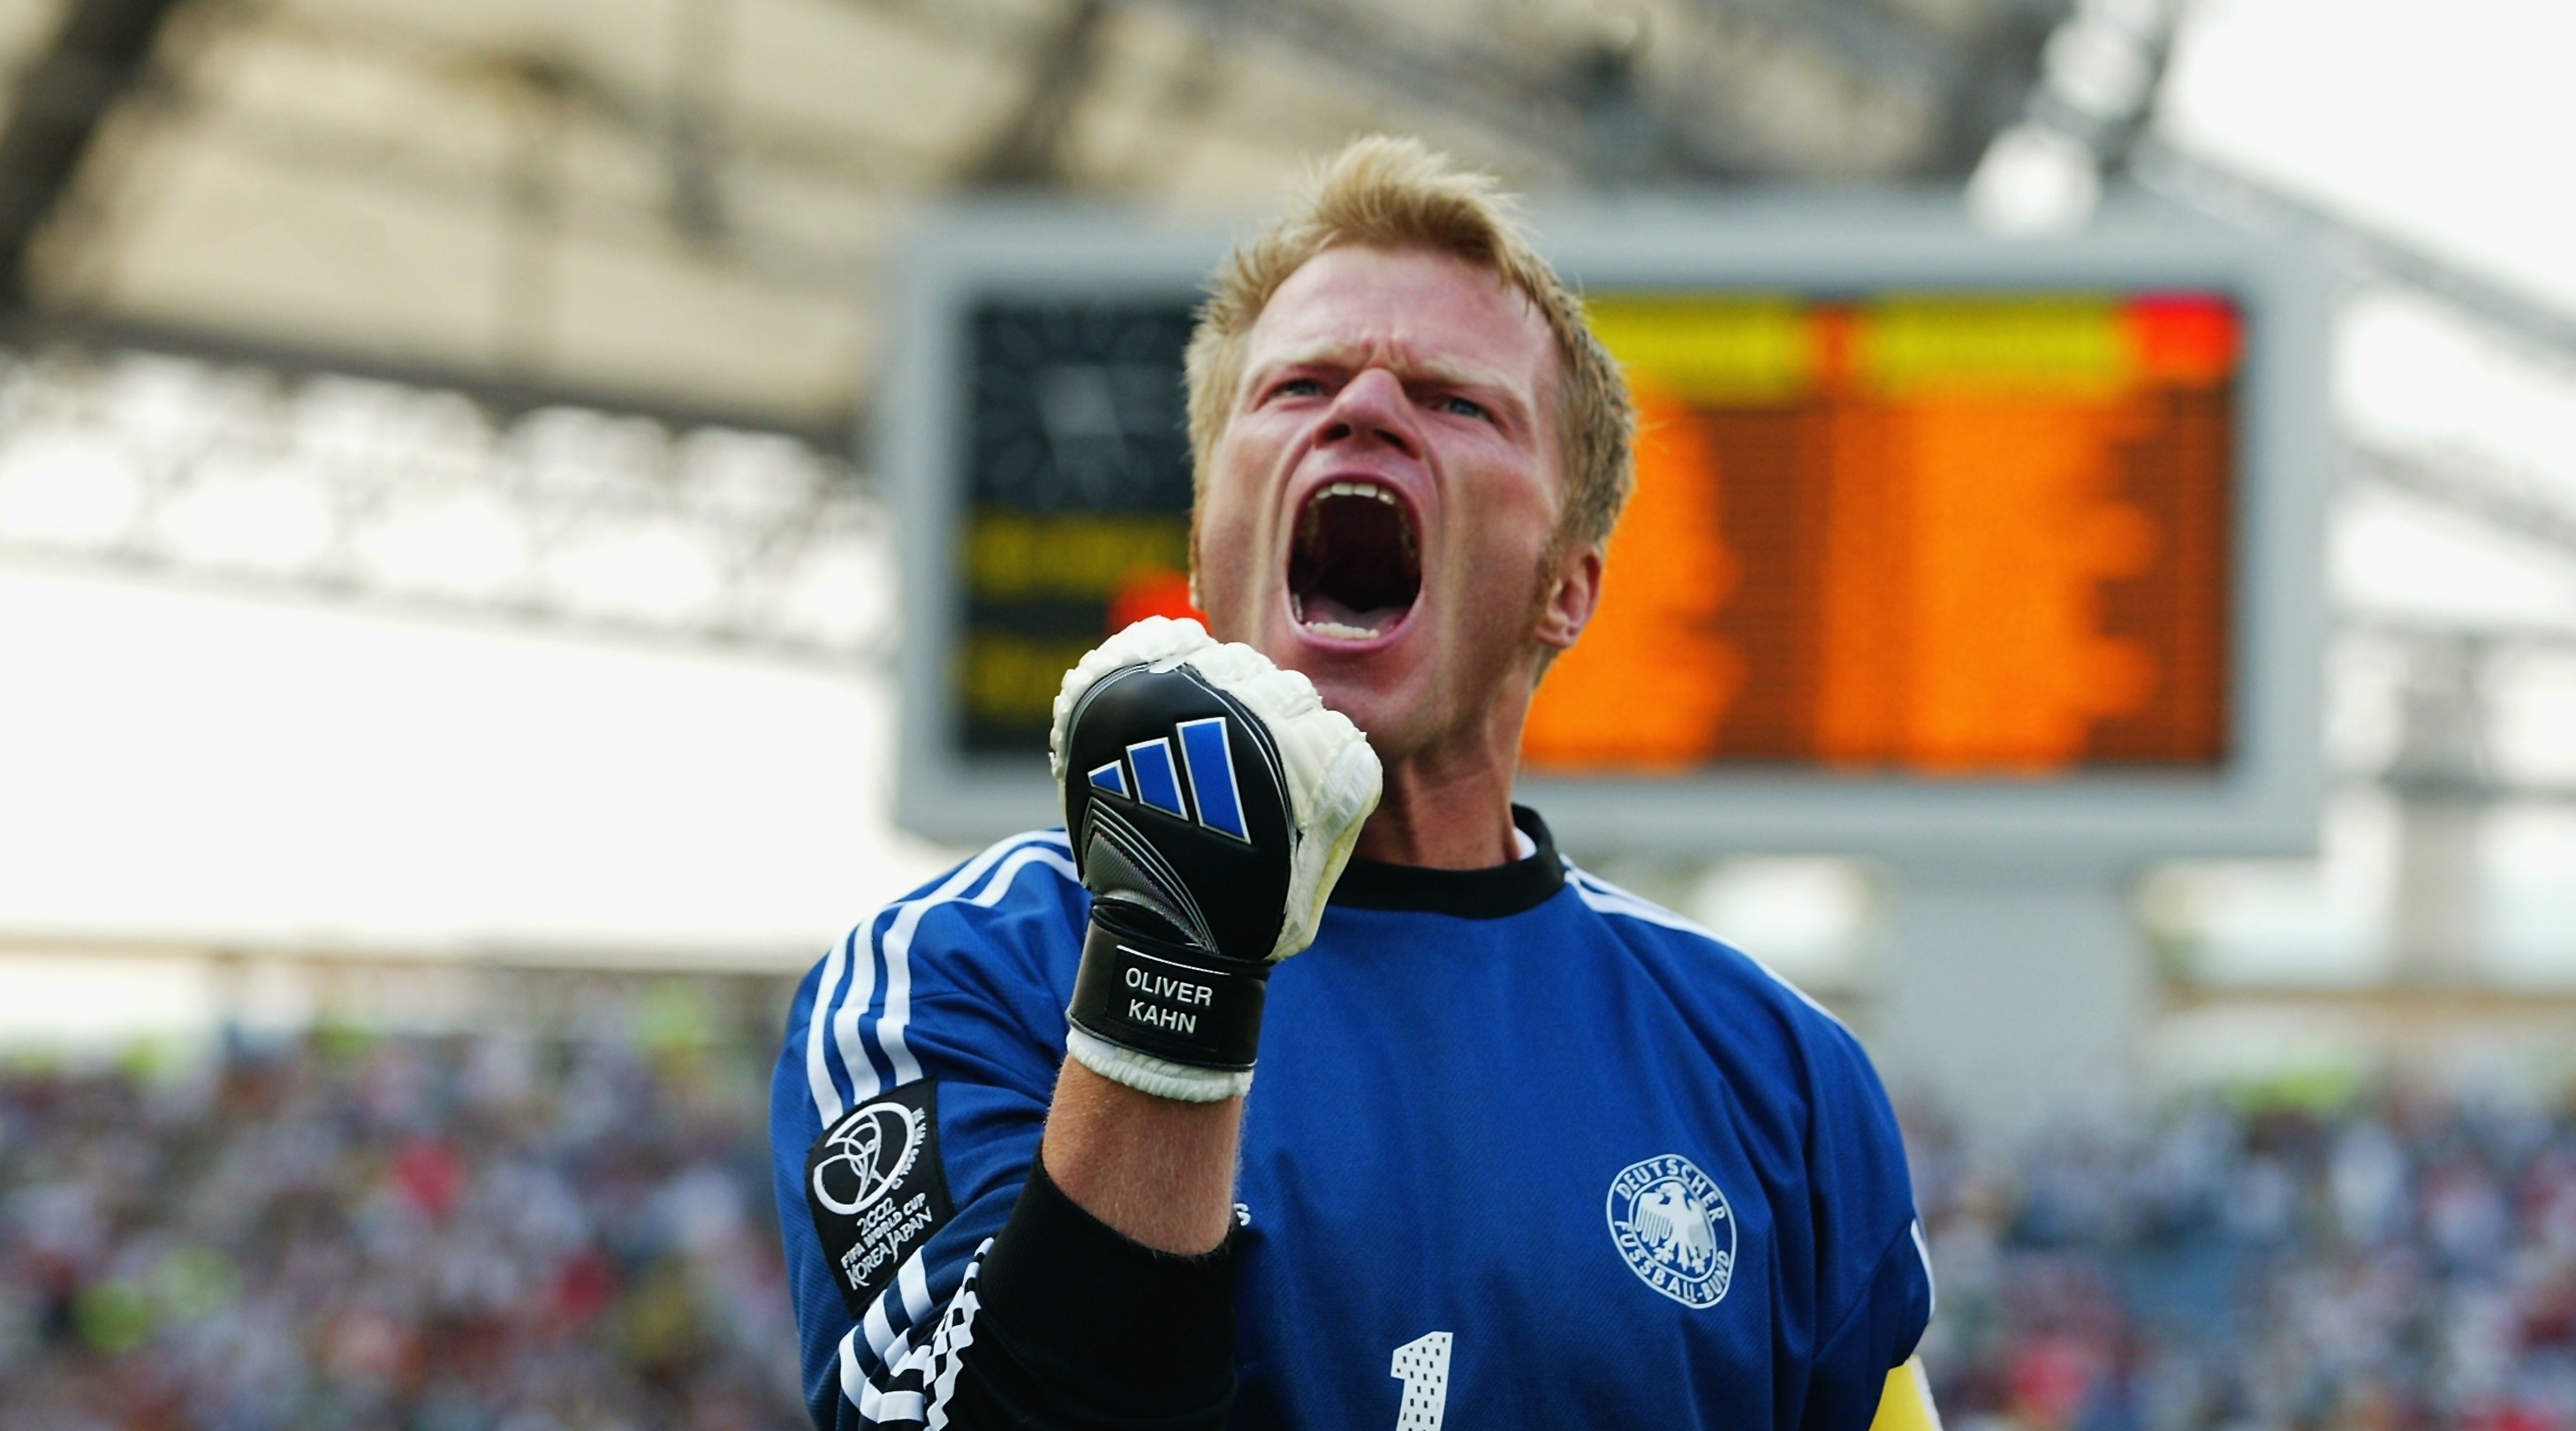 SEOGWIPO - JUNE 15: Goalkeeper Oliver Kahn of Germany celebrates Oliver Neuville's winning goal during the Germany v Paraguay, World Cup Second Round match played at the Seogwipo-Jeju World Cup Stadium in Seogwipo, South Korea on June 15, 2002. Germany won 1-0. (Photo by Ben Radford/Getty Images)